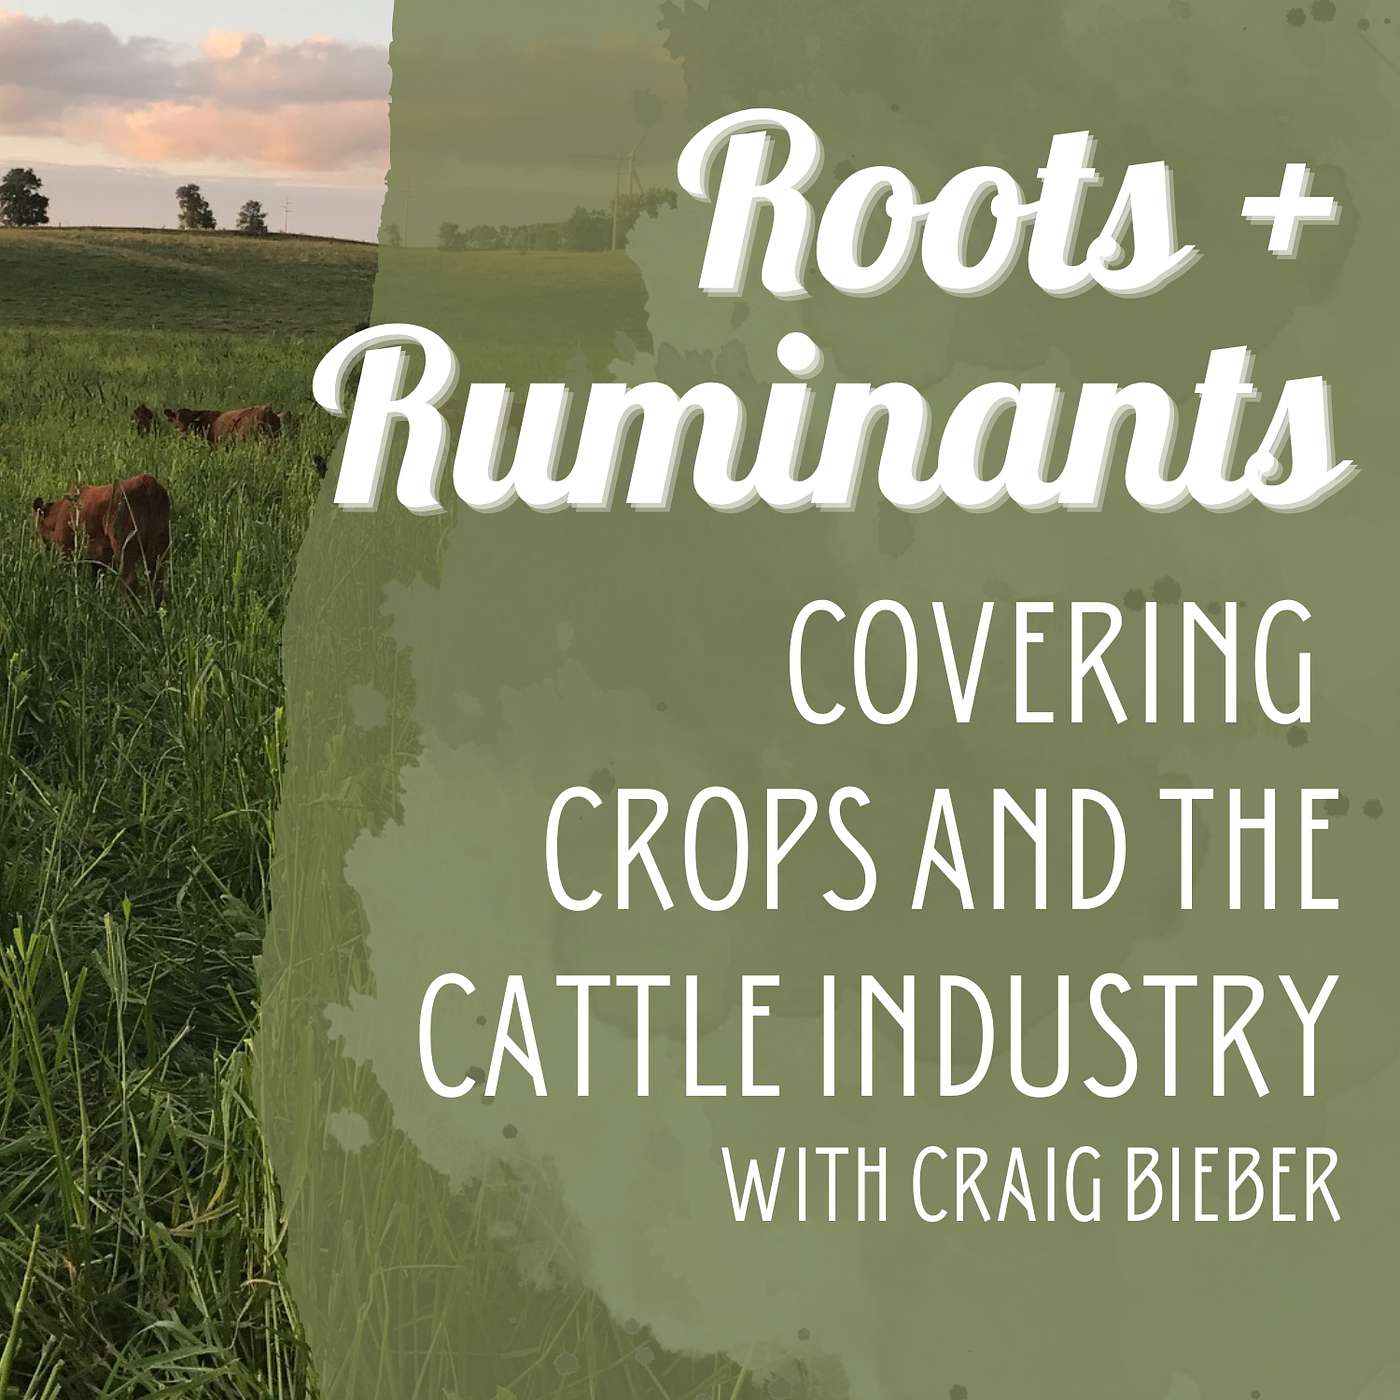 Covering crop rotations and the cattle industry with Craig Bieber cover art